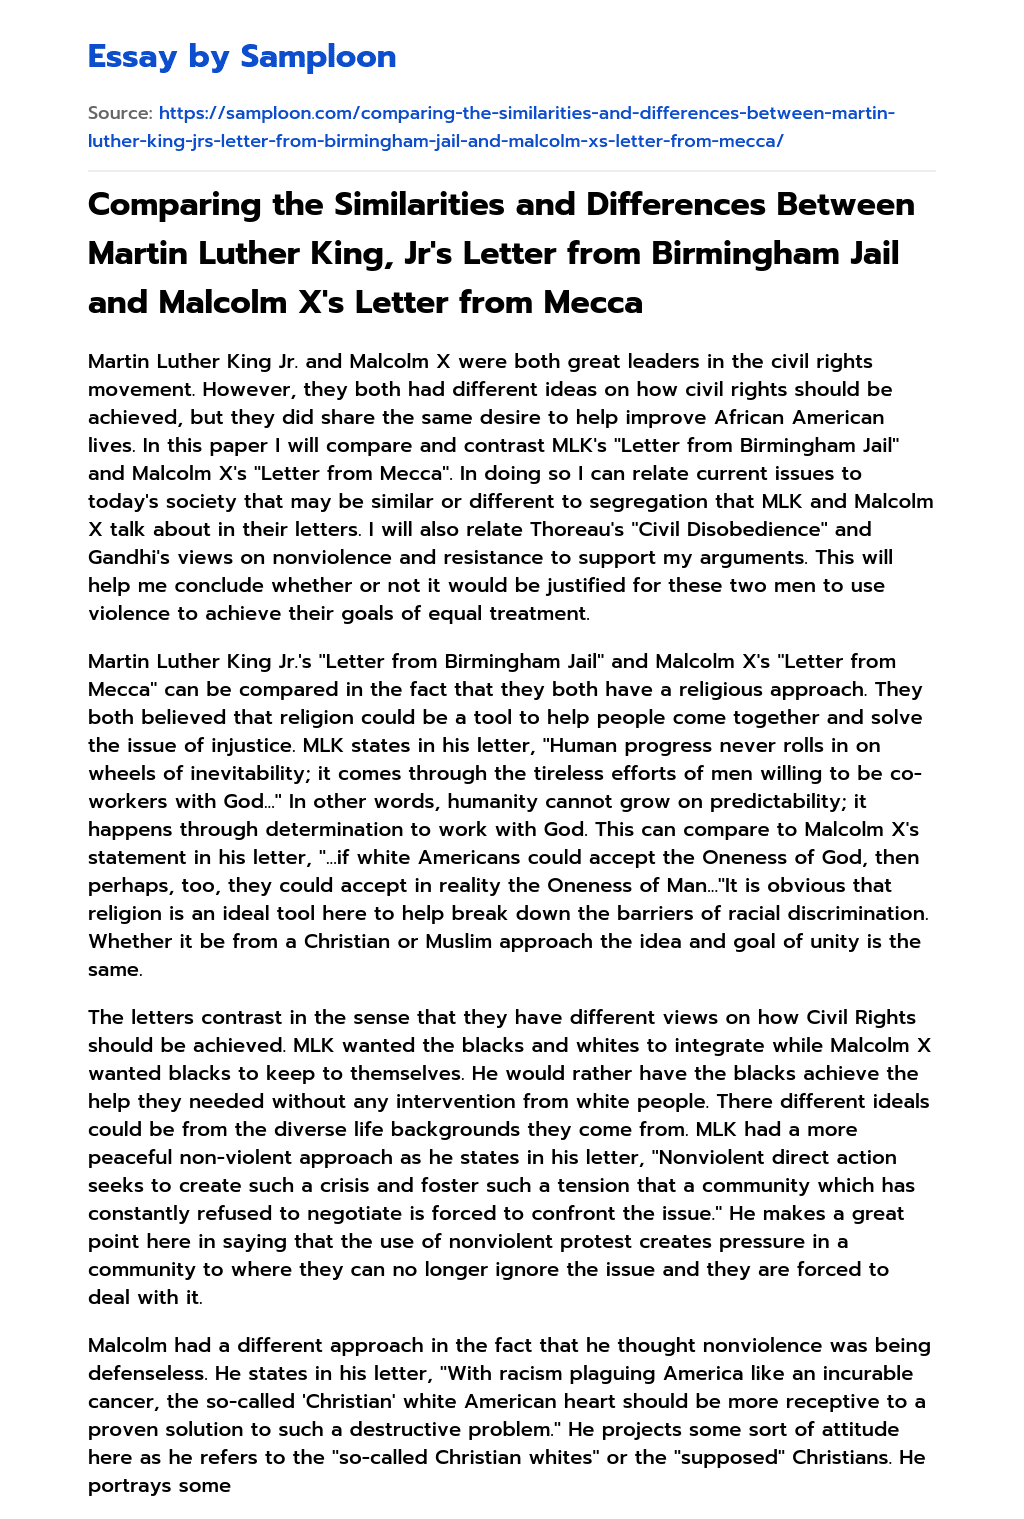 Comparing the Similarities and Differences Between Martin Luther King, Jr’s Letter from Birmingham Jail and Malcolm X’s Letter from Mecca essay